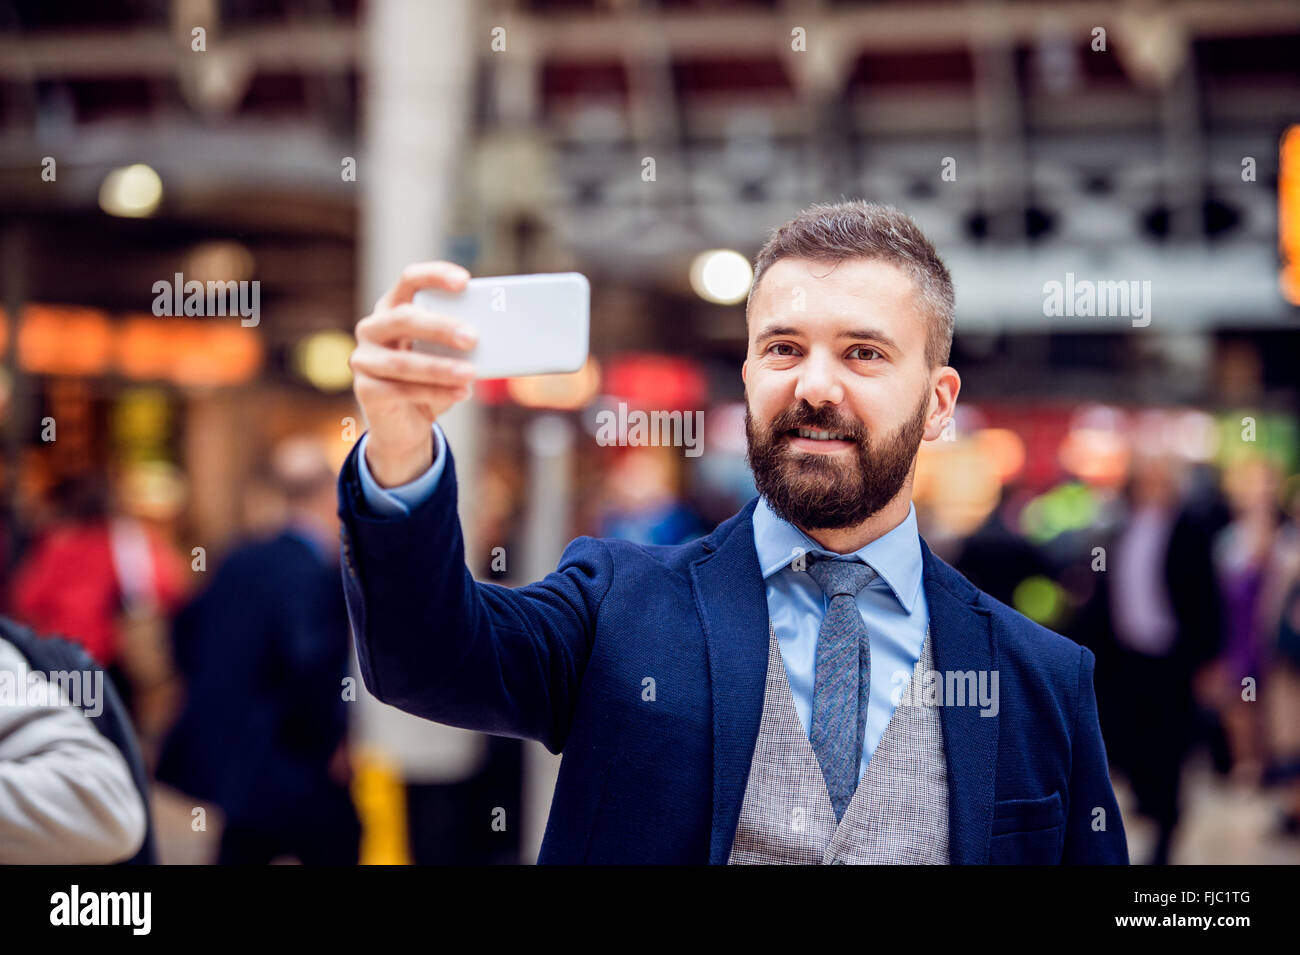 Hipster businessman with smartphone taking selfie, crowded train Stock Photo